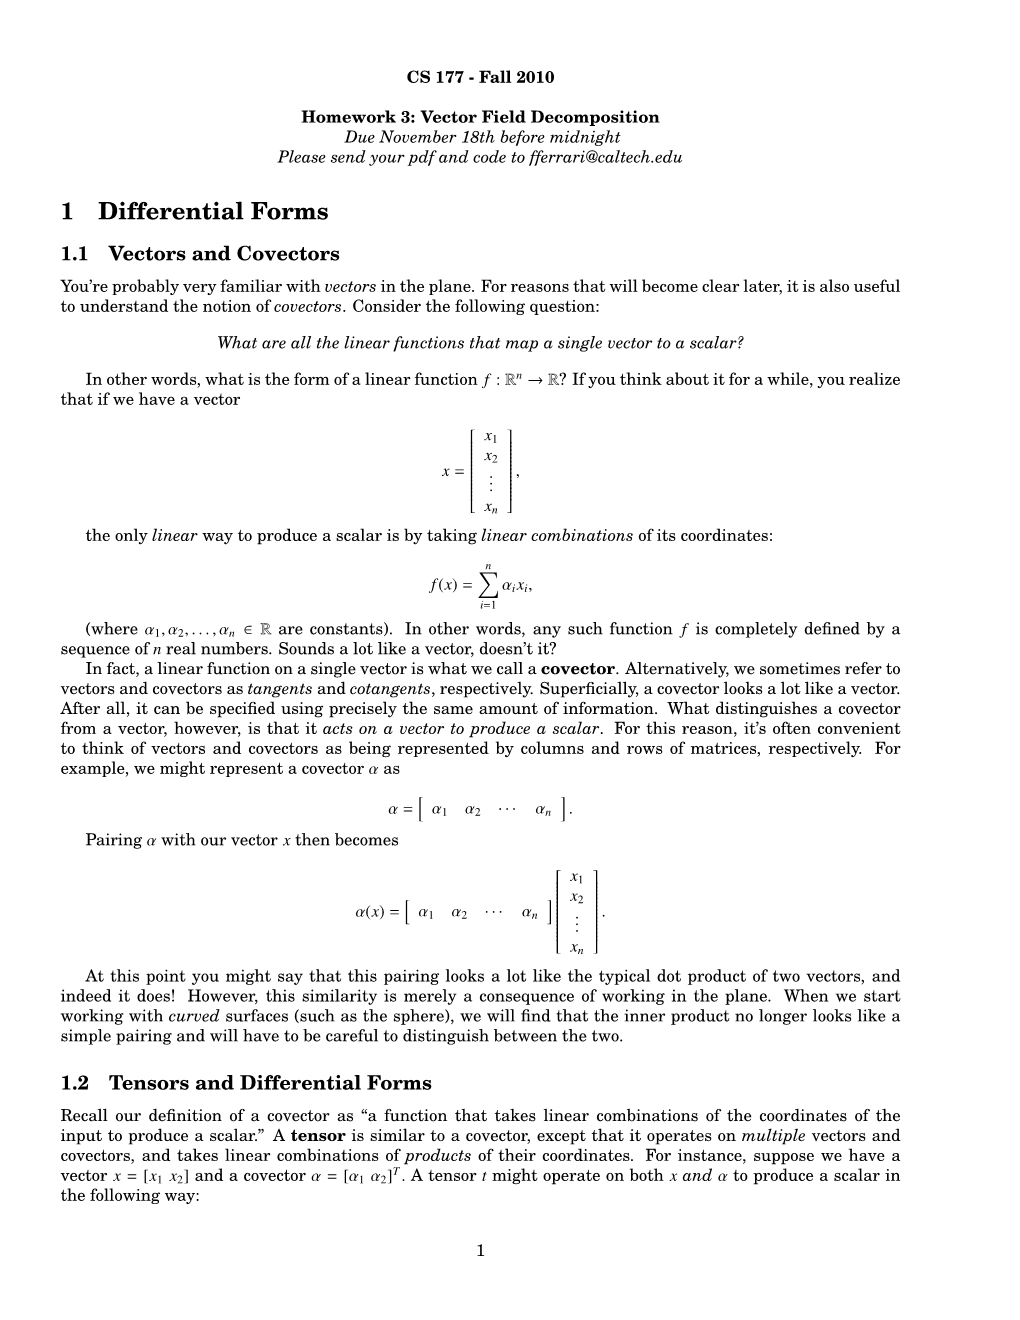 1 Differential Forms